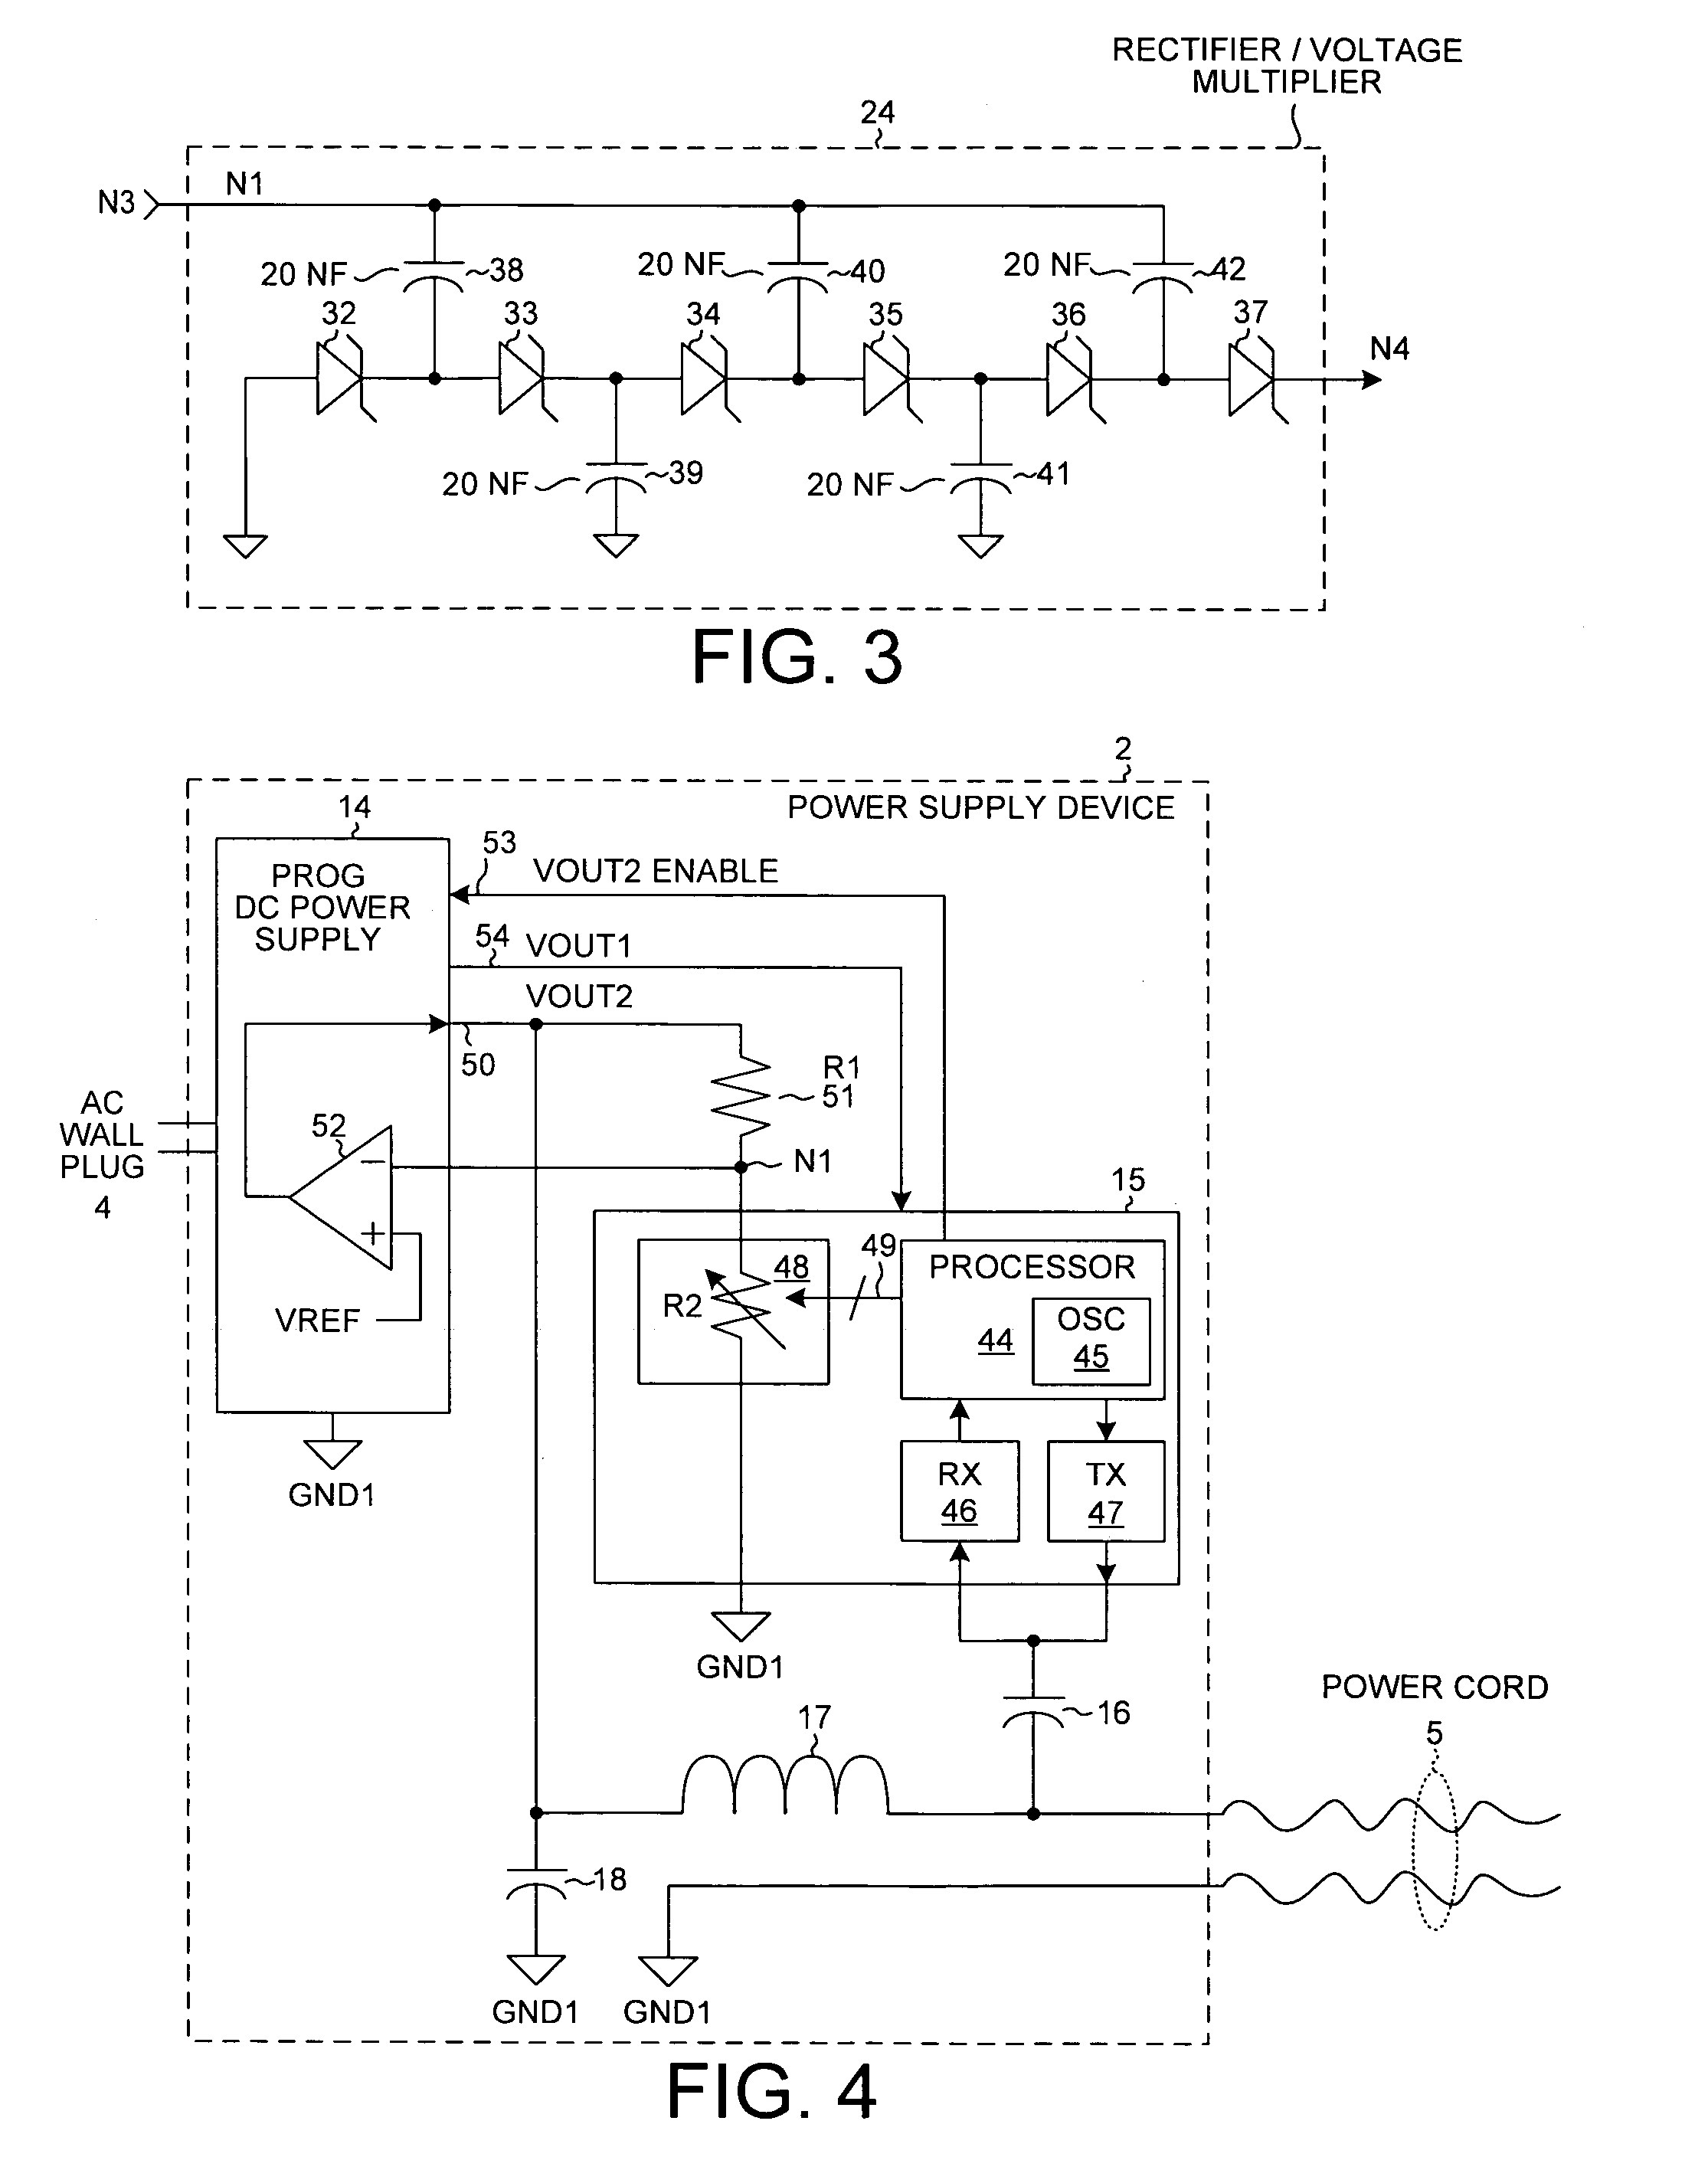 Multiple output power supply that configures itself to multiple loads